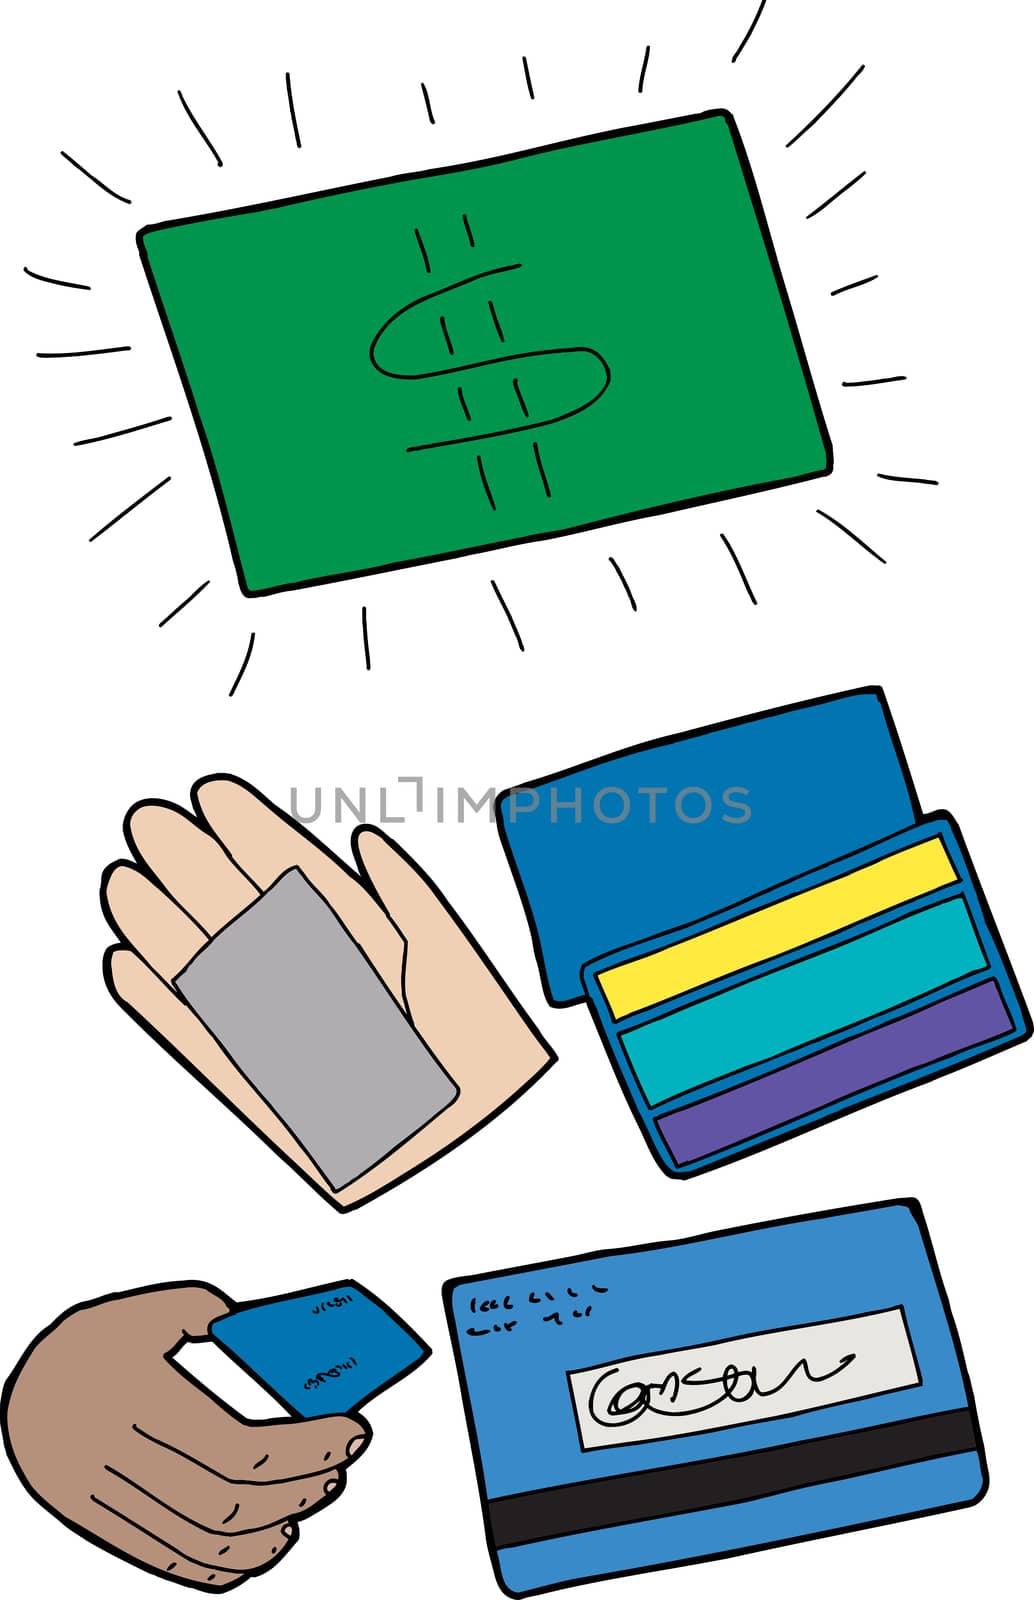 Credit and debit card symbols over white background